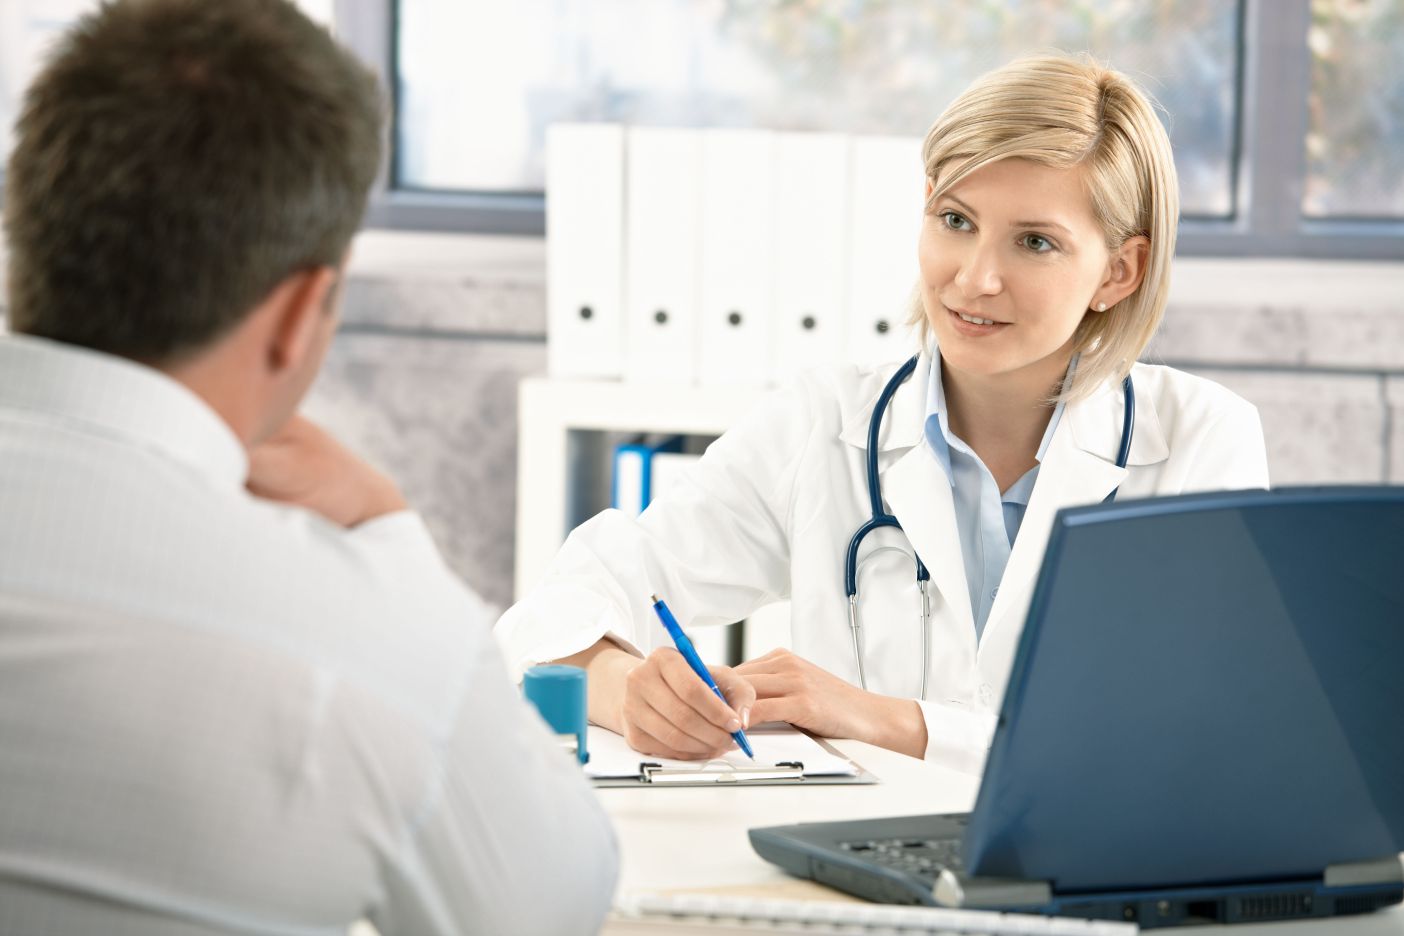 How Tough Are You? A stock photo of a patient consulting doctor.